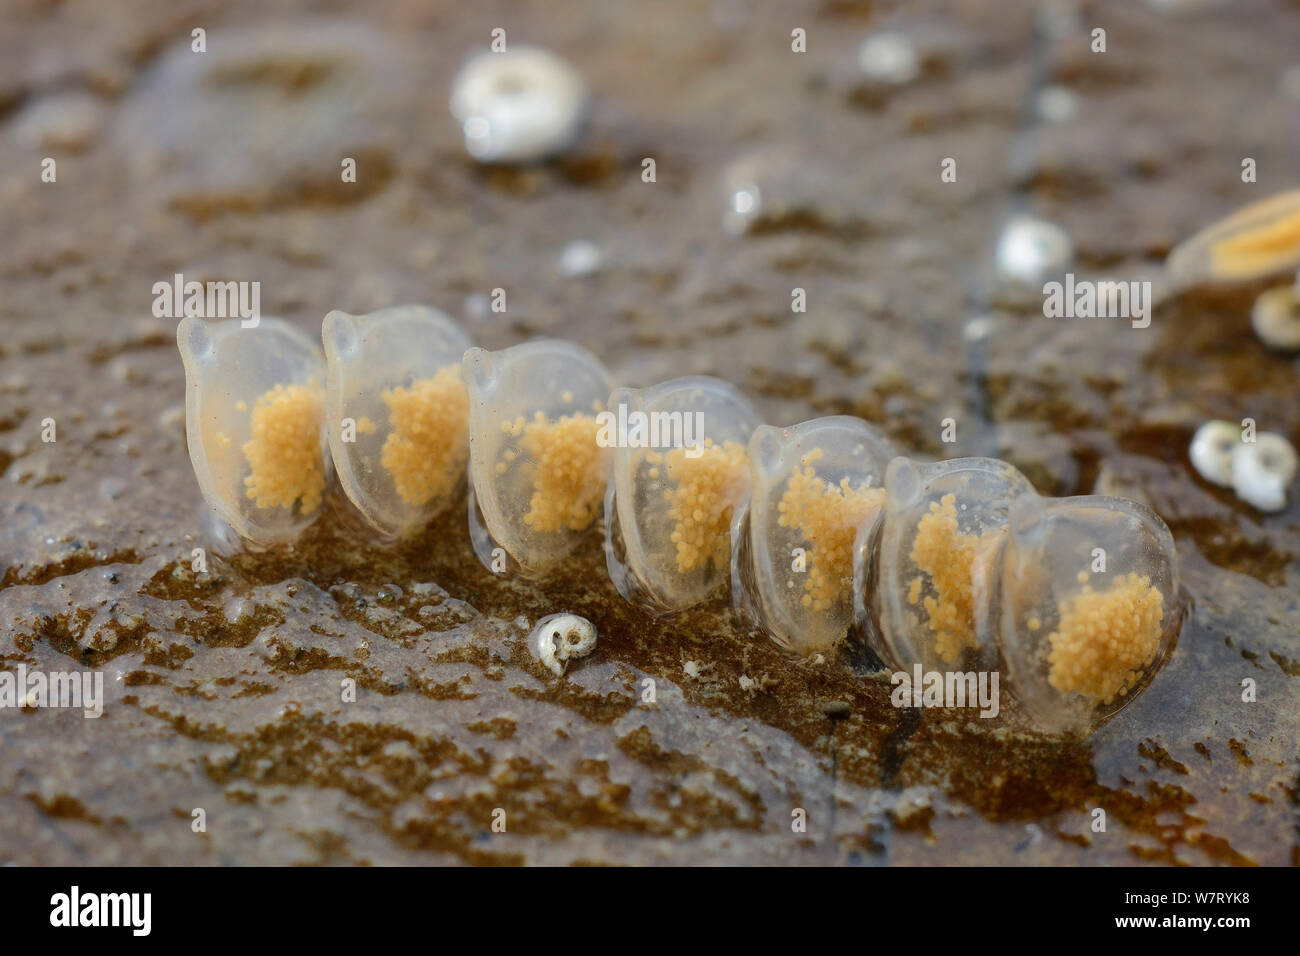 Seven Netted dog whelk (Nassarius retuculata) egg cases attached to a rock exposed at low tide, Lyme Regis, Dorset, UK, May Stock Photo